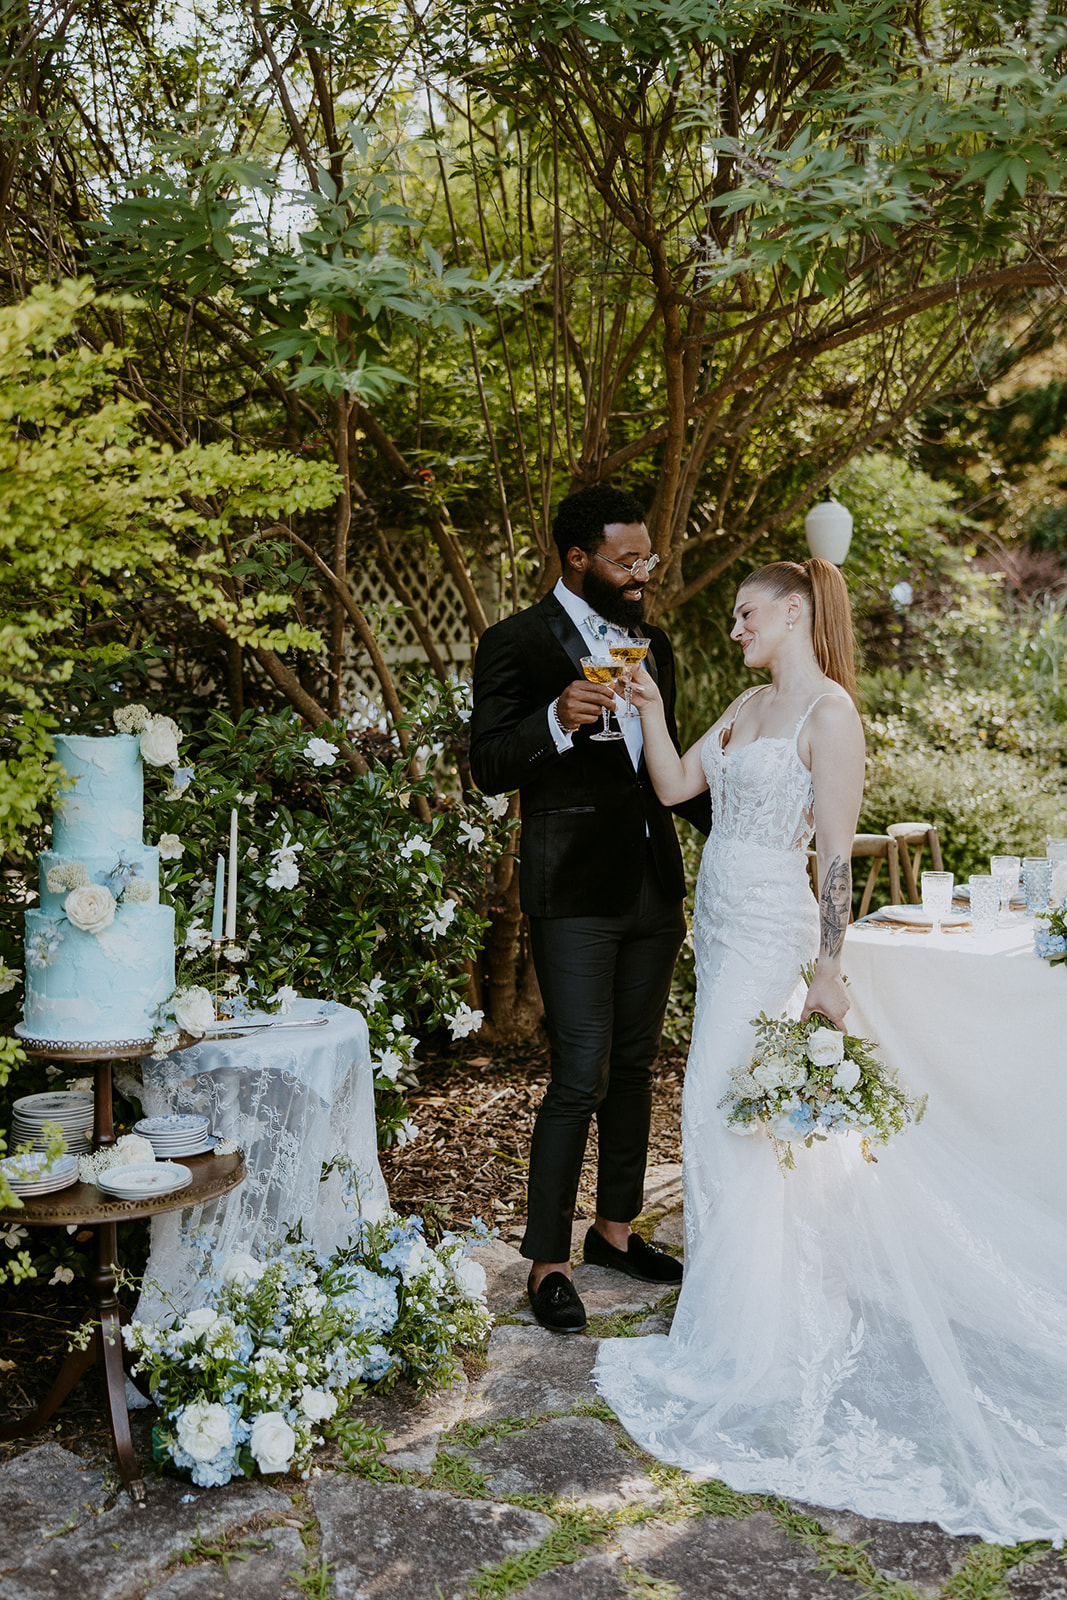 A couple stands outdoors in a garden setting, at Wildflower 301 wearing wedding attire. They are smiling and holding champagne glasses. A decorated table with a blue and white cake is beside them